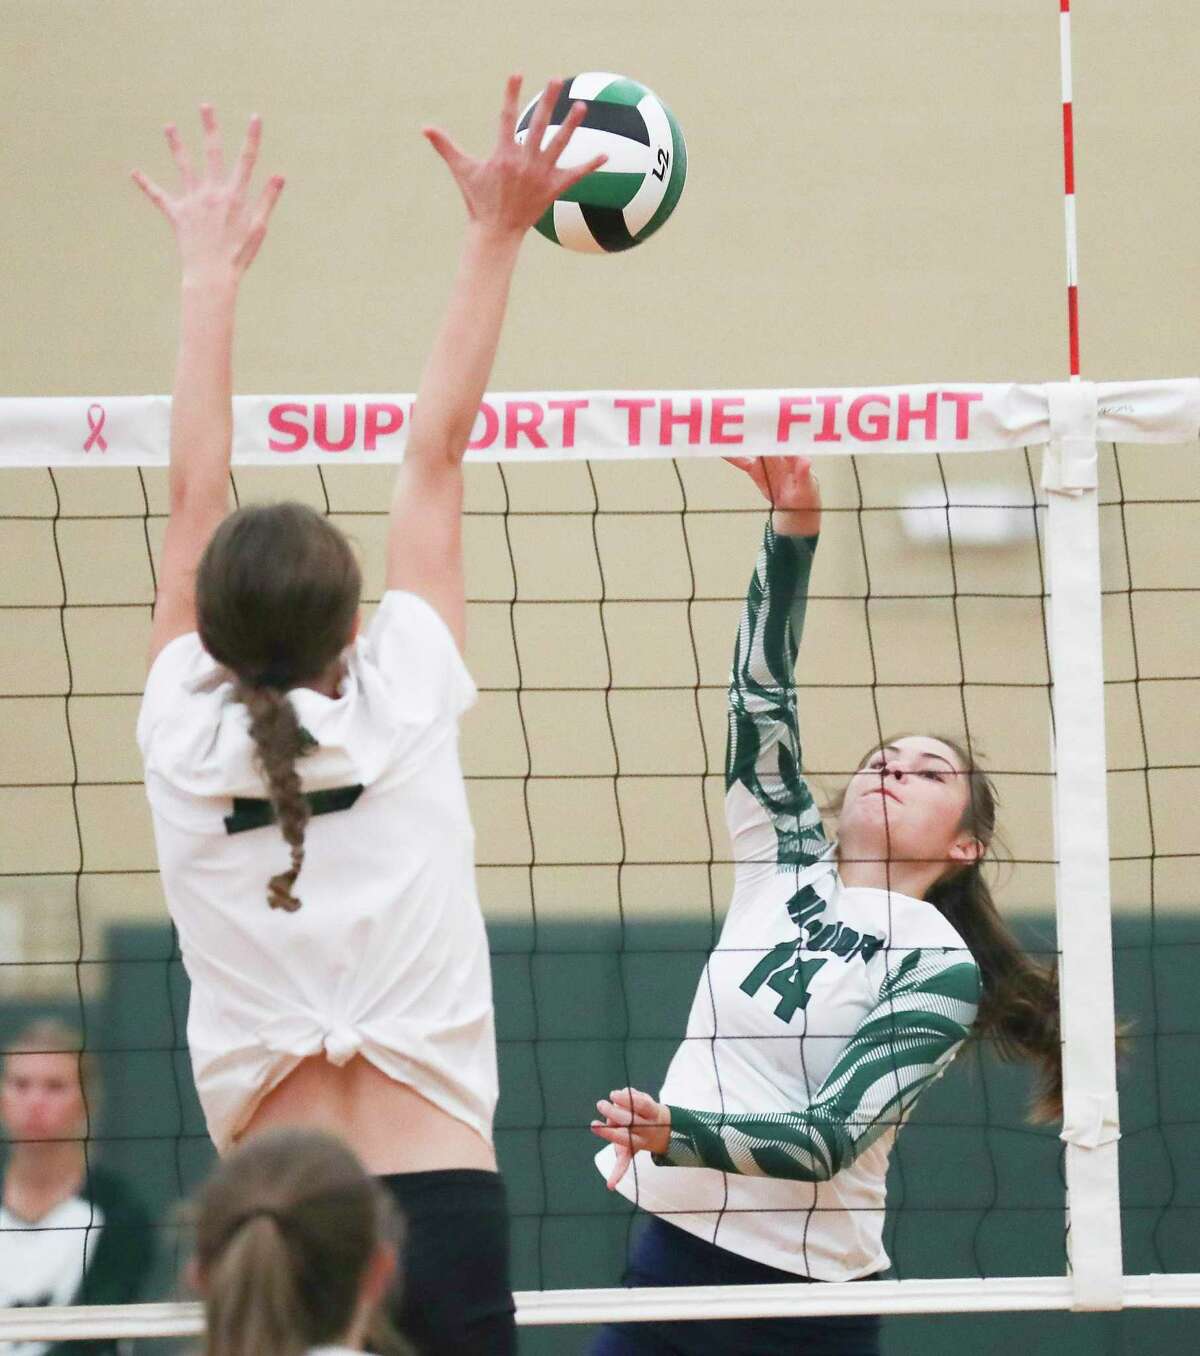 The Woodlands Christian Academy's Jordan Booth (14) gets a shot off in the first set of a non-district high school volleyball match at The John Cooper School, Wednesday, Aug. 10, 2022, in The Woodlands.